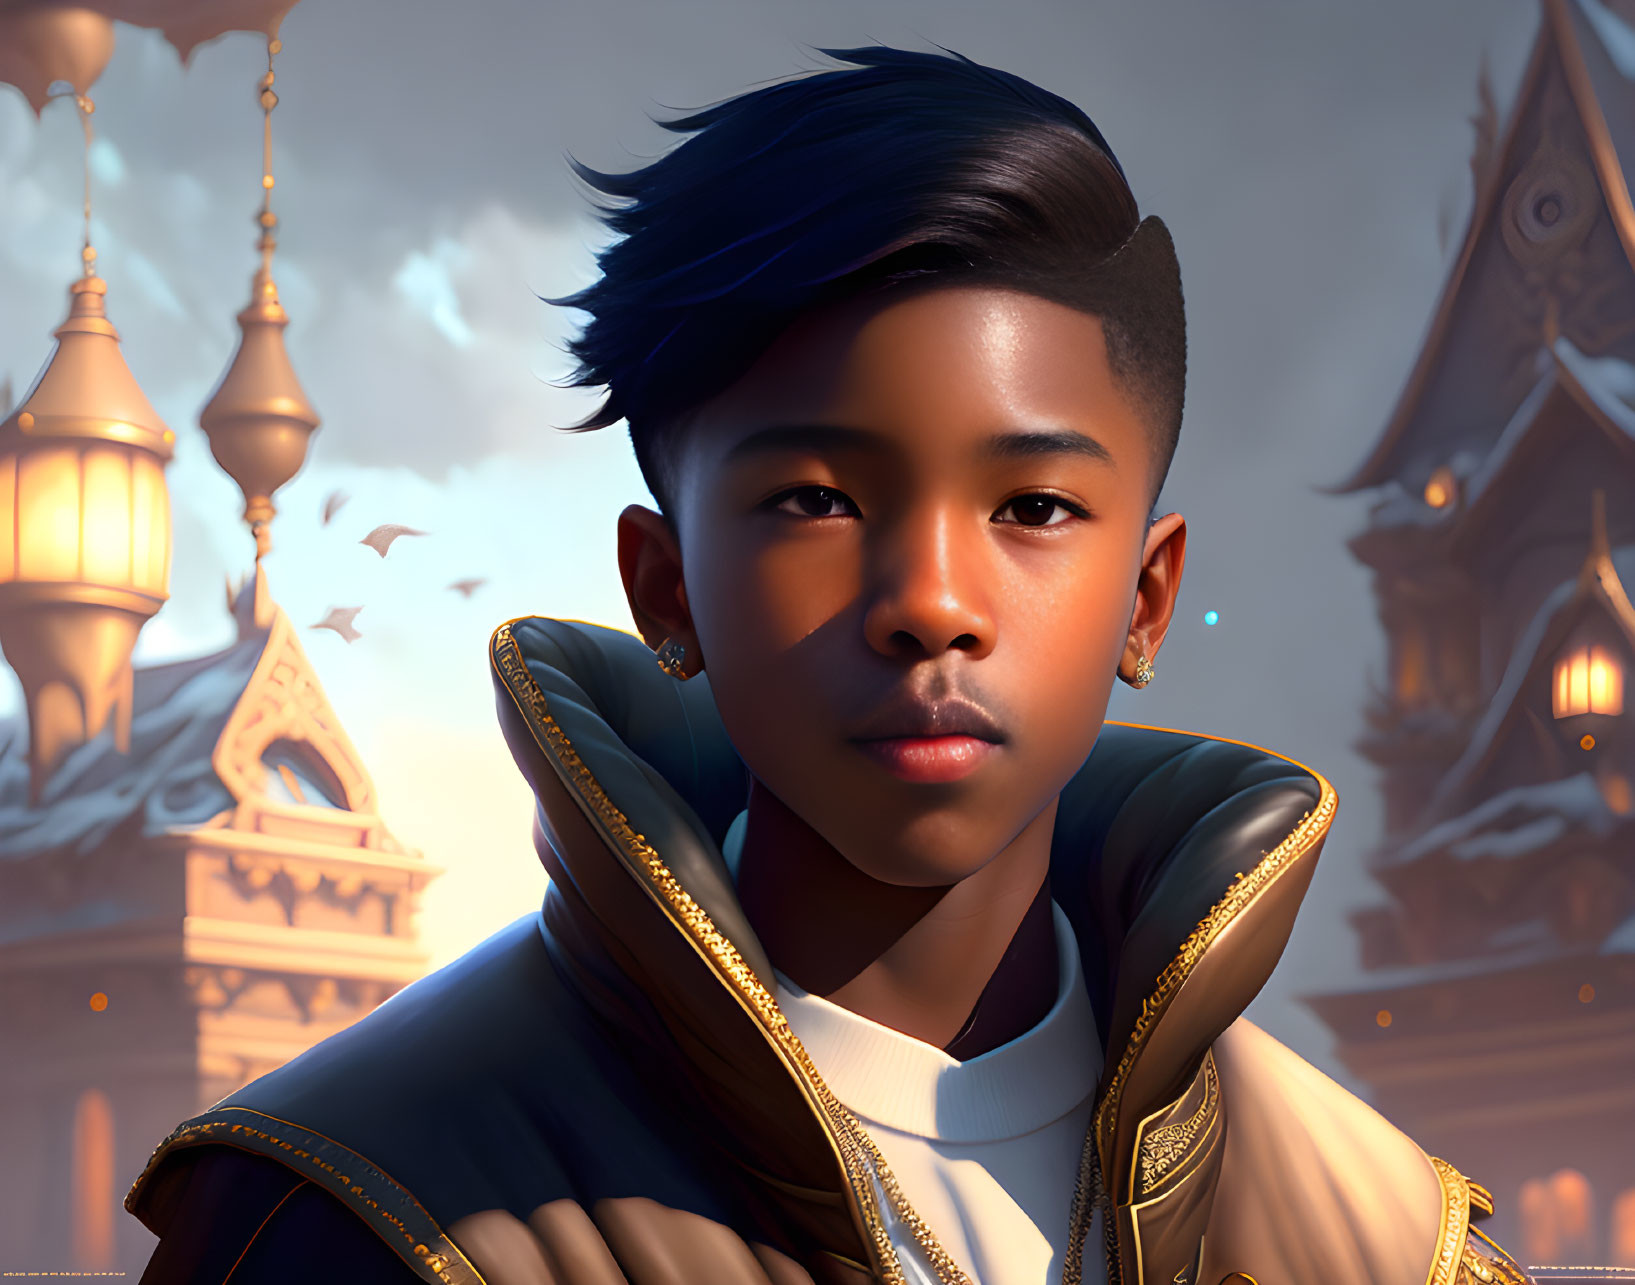 Young boy in futuristic jacket with ornate buildings and birds in background